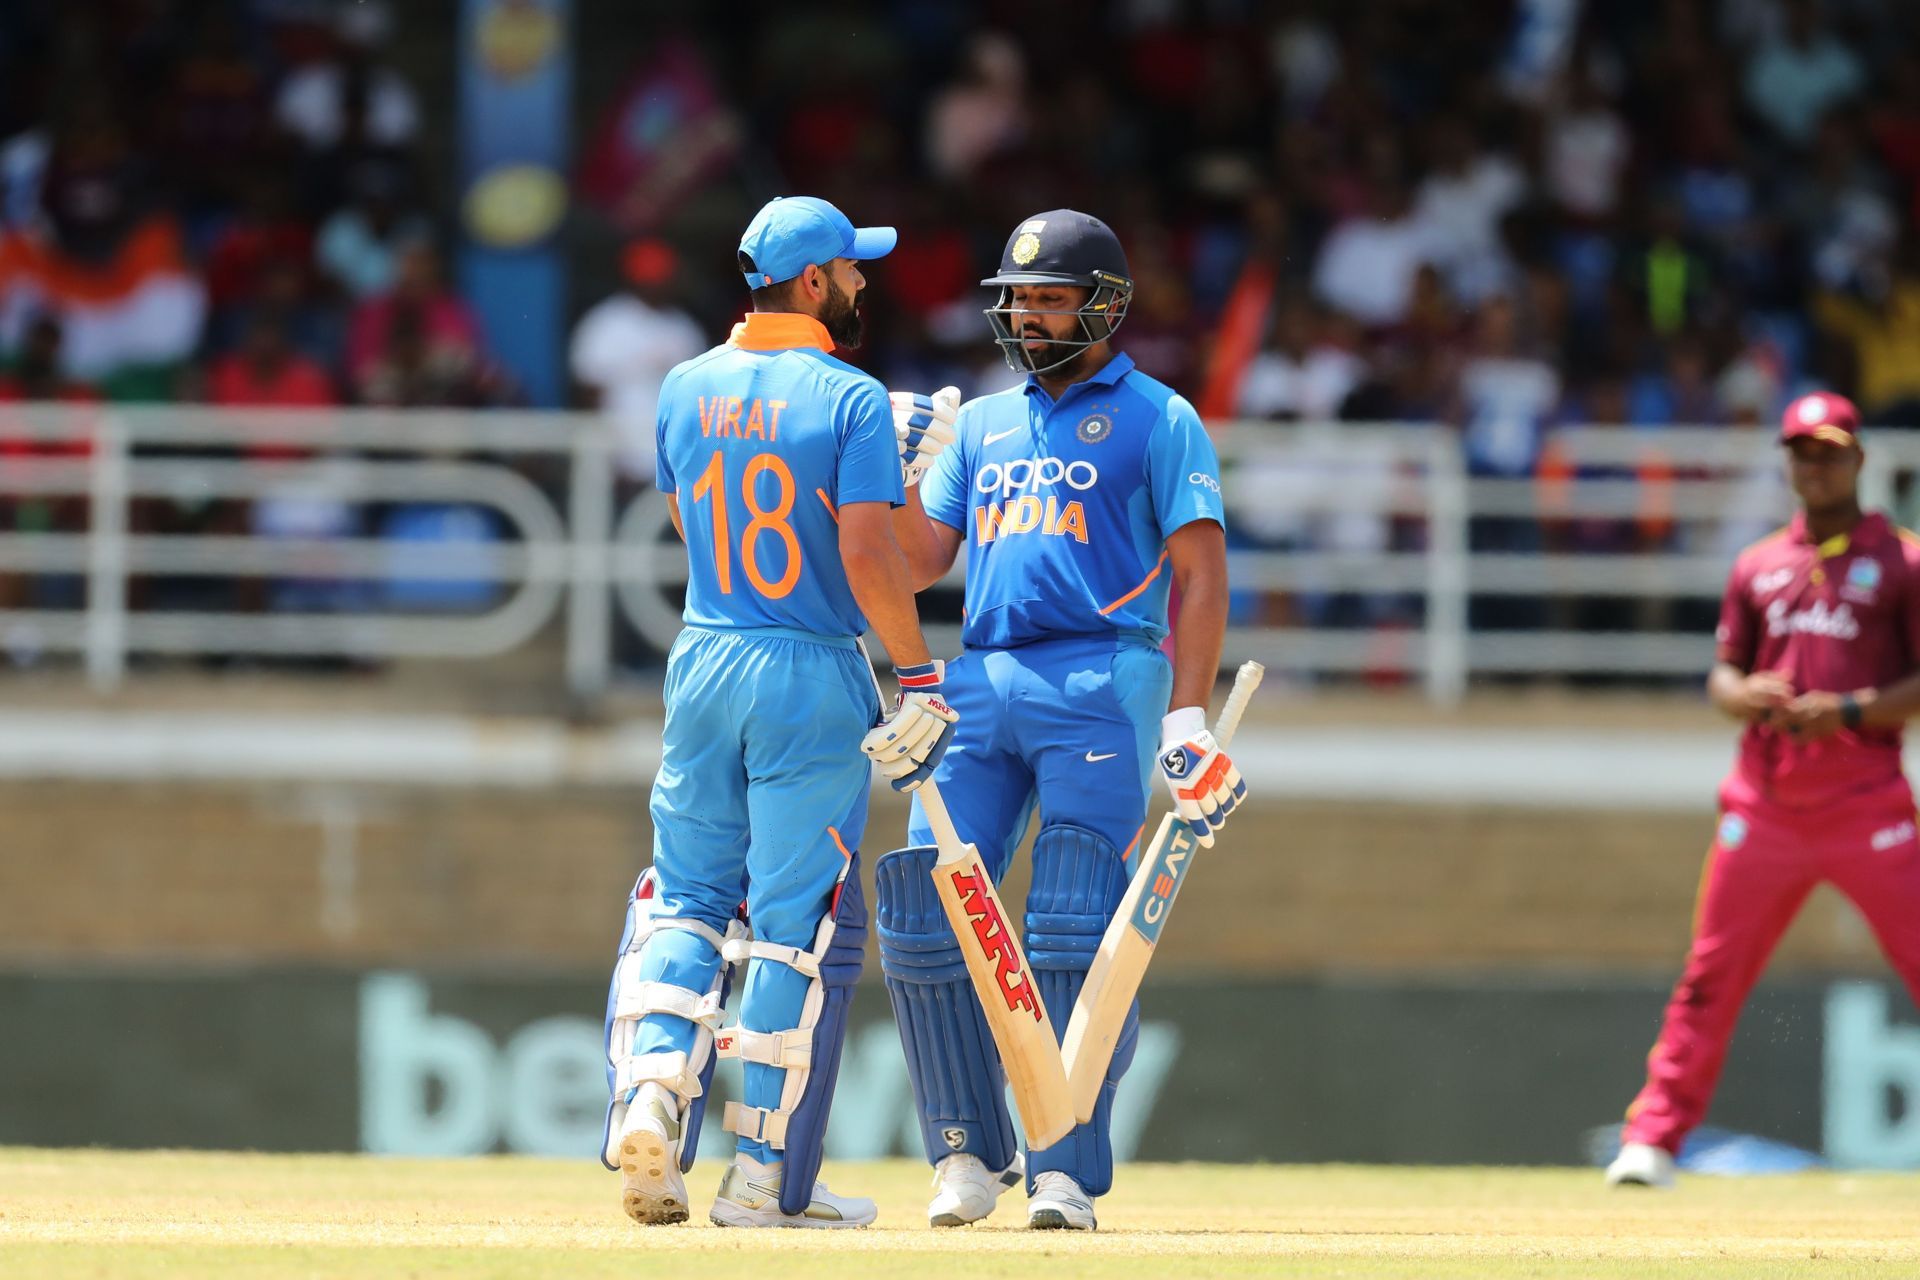 Virat Kohli and Rohit Sharma are the most experienced players in the Indian lineup.